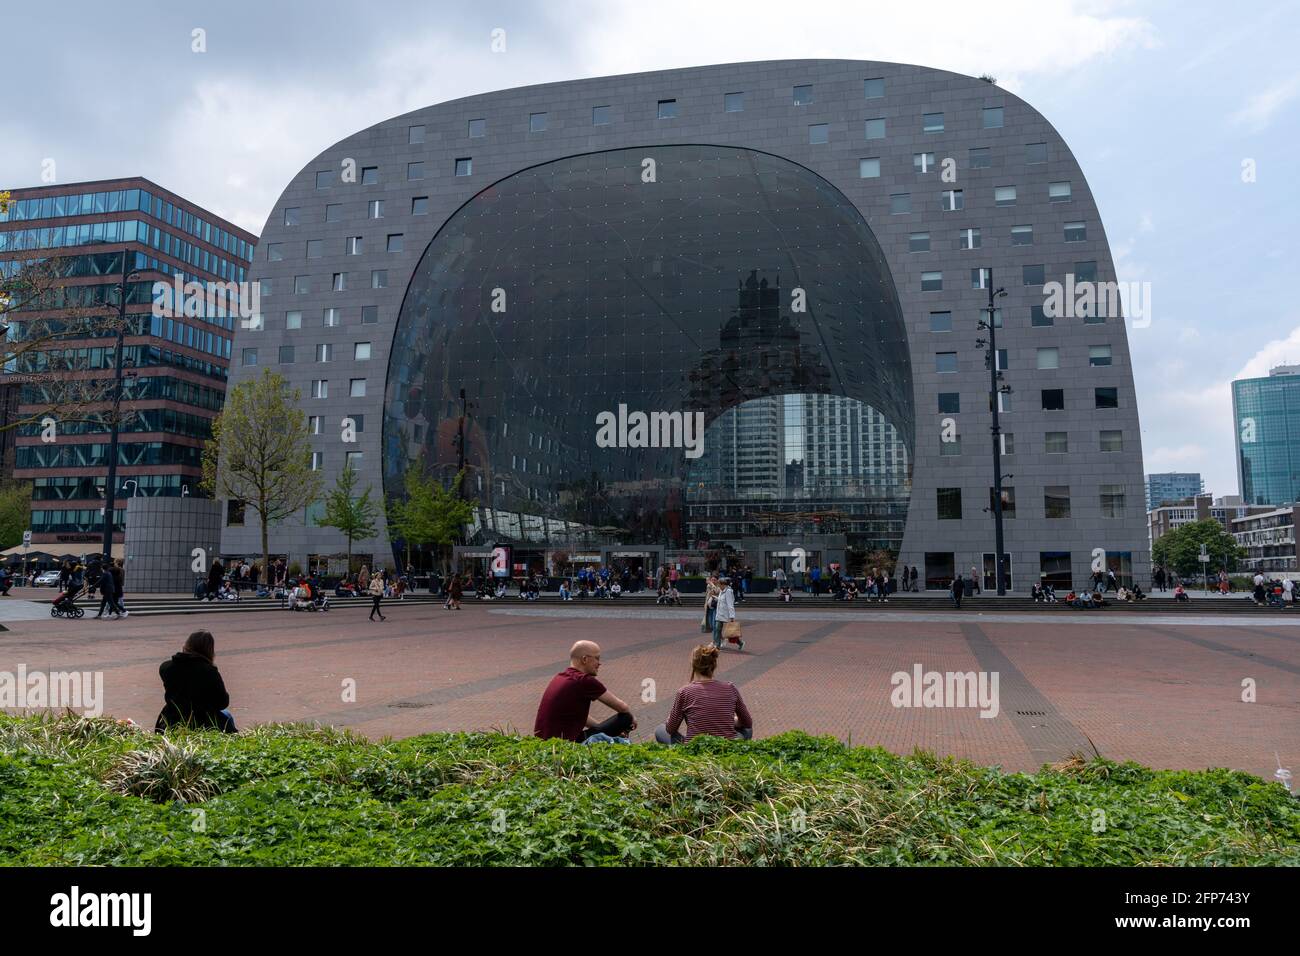 Rotterdam, Netherlands - 14 May, 2021: the Markthal building and train station with people relaxing and the city square in the foreground Stock Photo